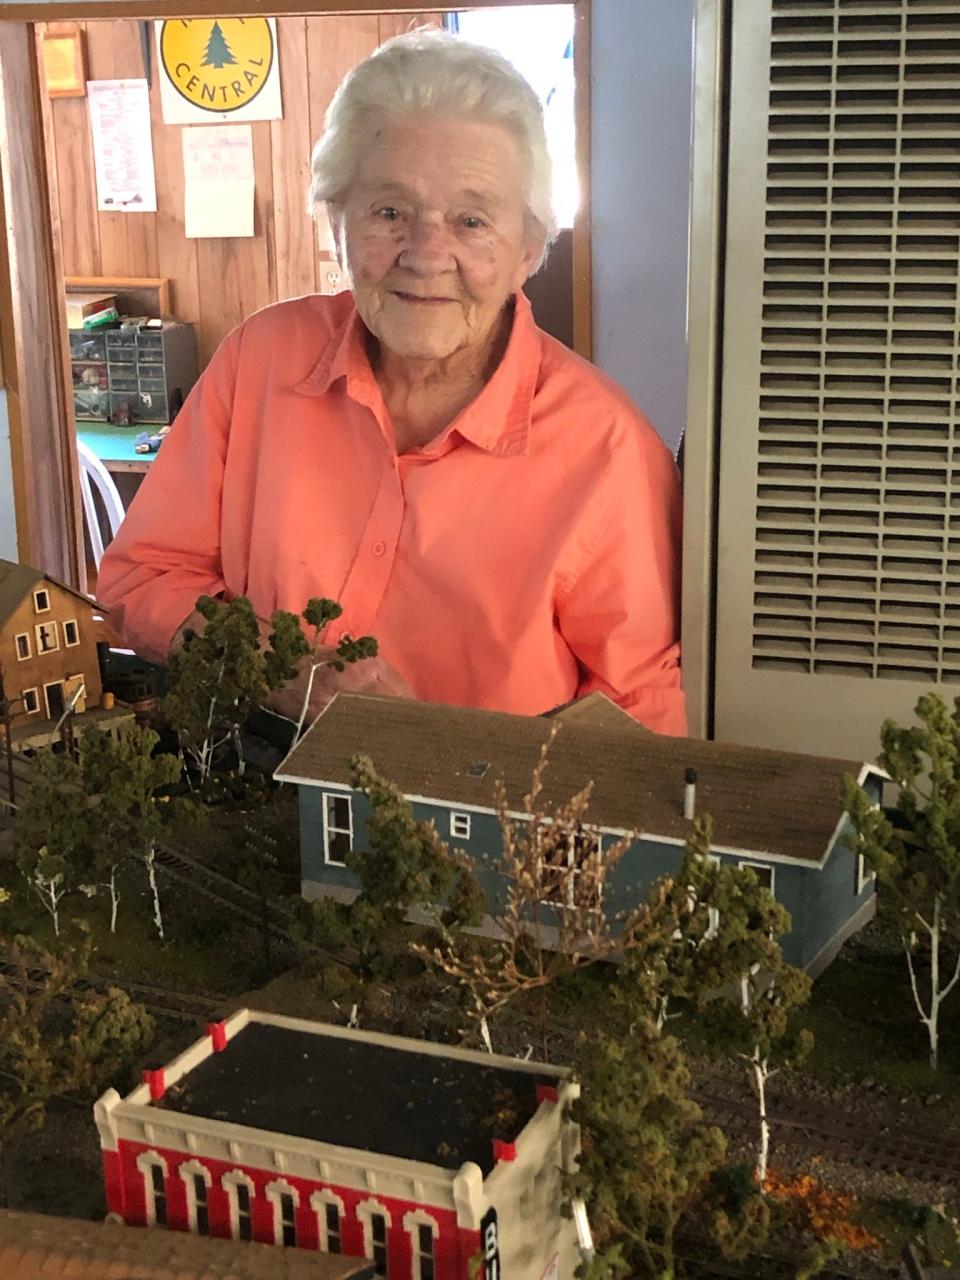 Helen Beal (Jonesport, Maine), designed, built and operated the Maine Central Model Railroad with husband Harold “Buz” Beal for the past four decades. Helen is standing in front of a model her husband made of their own Jonesport home (green).